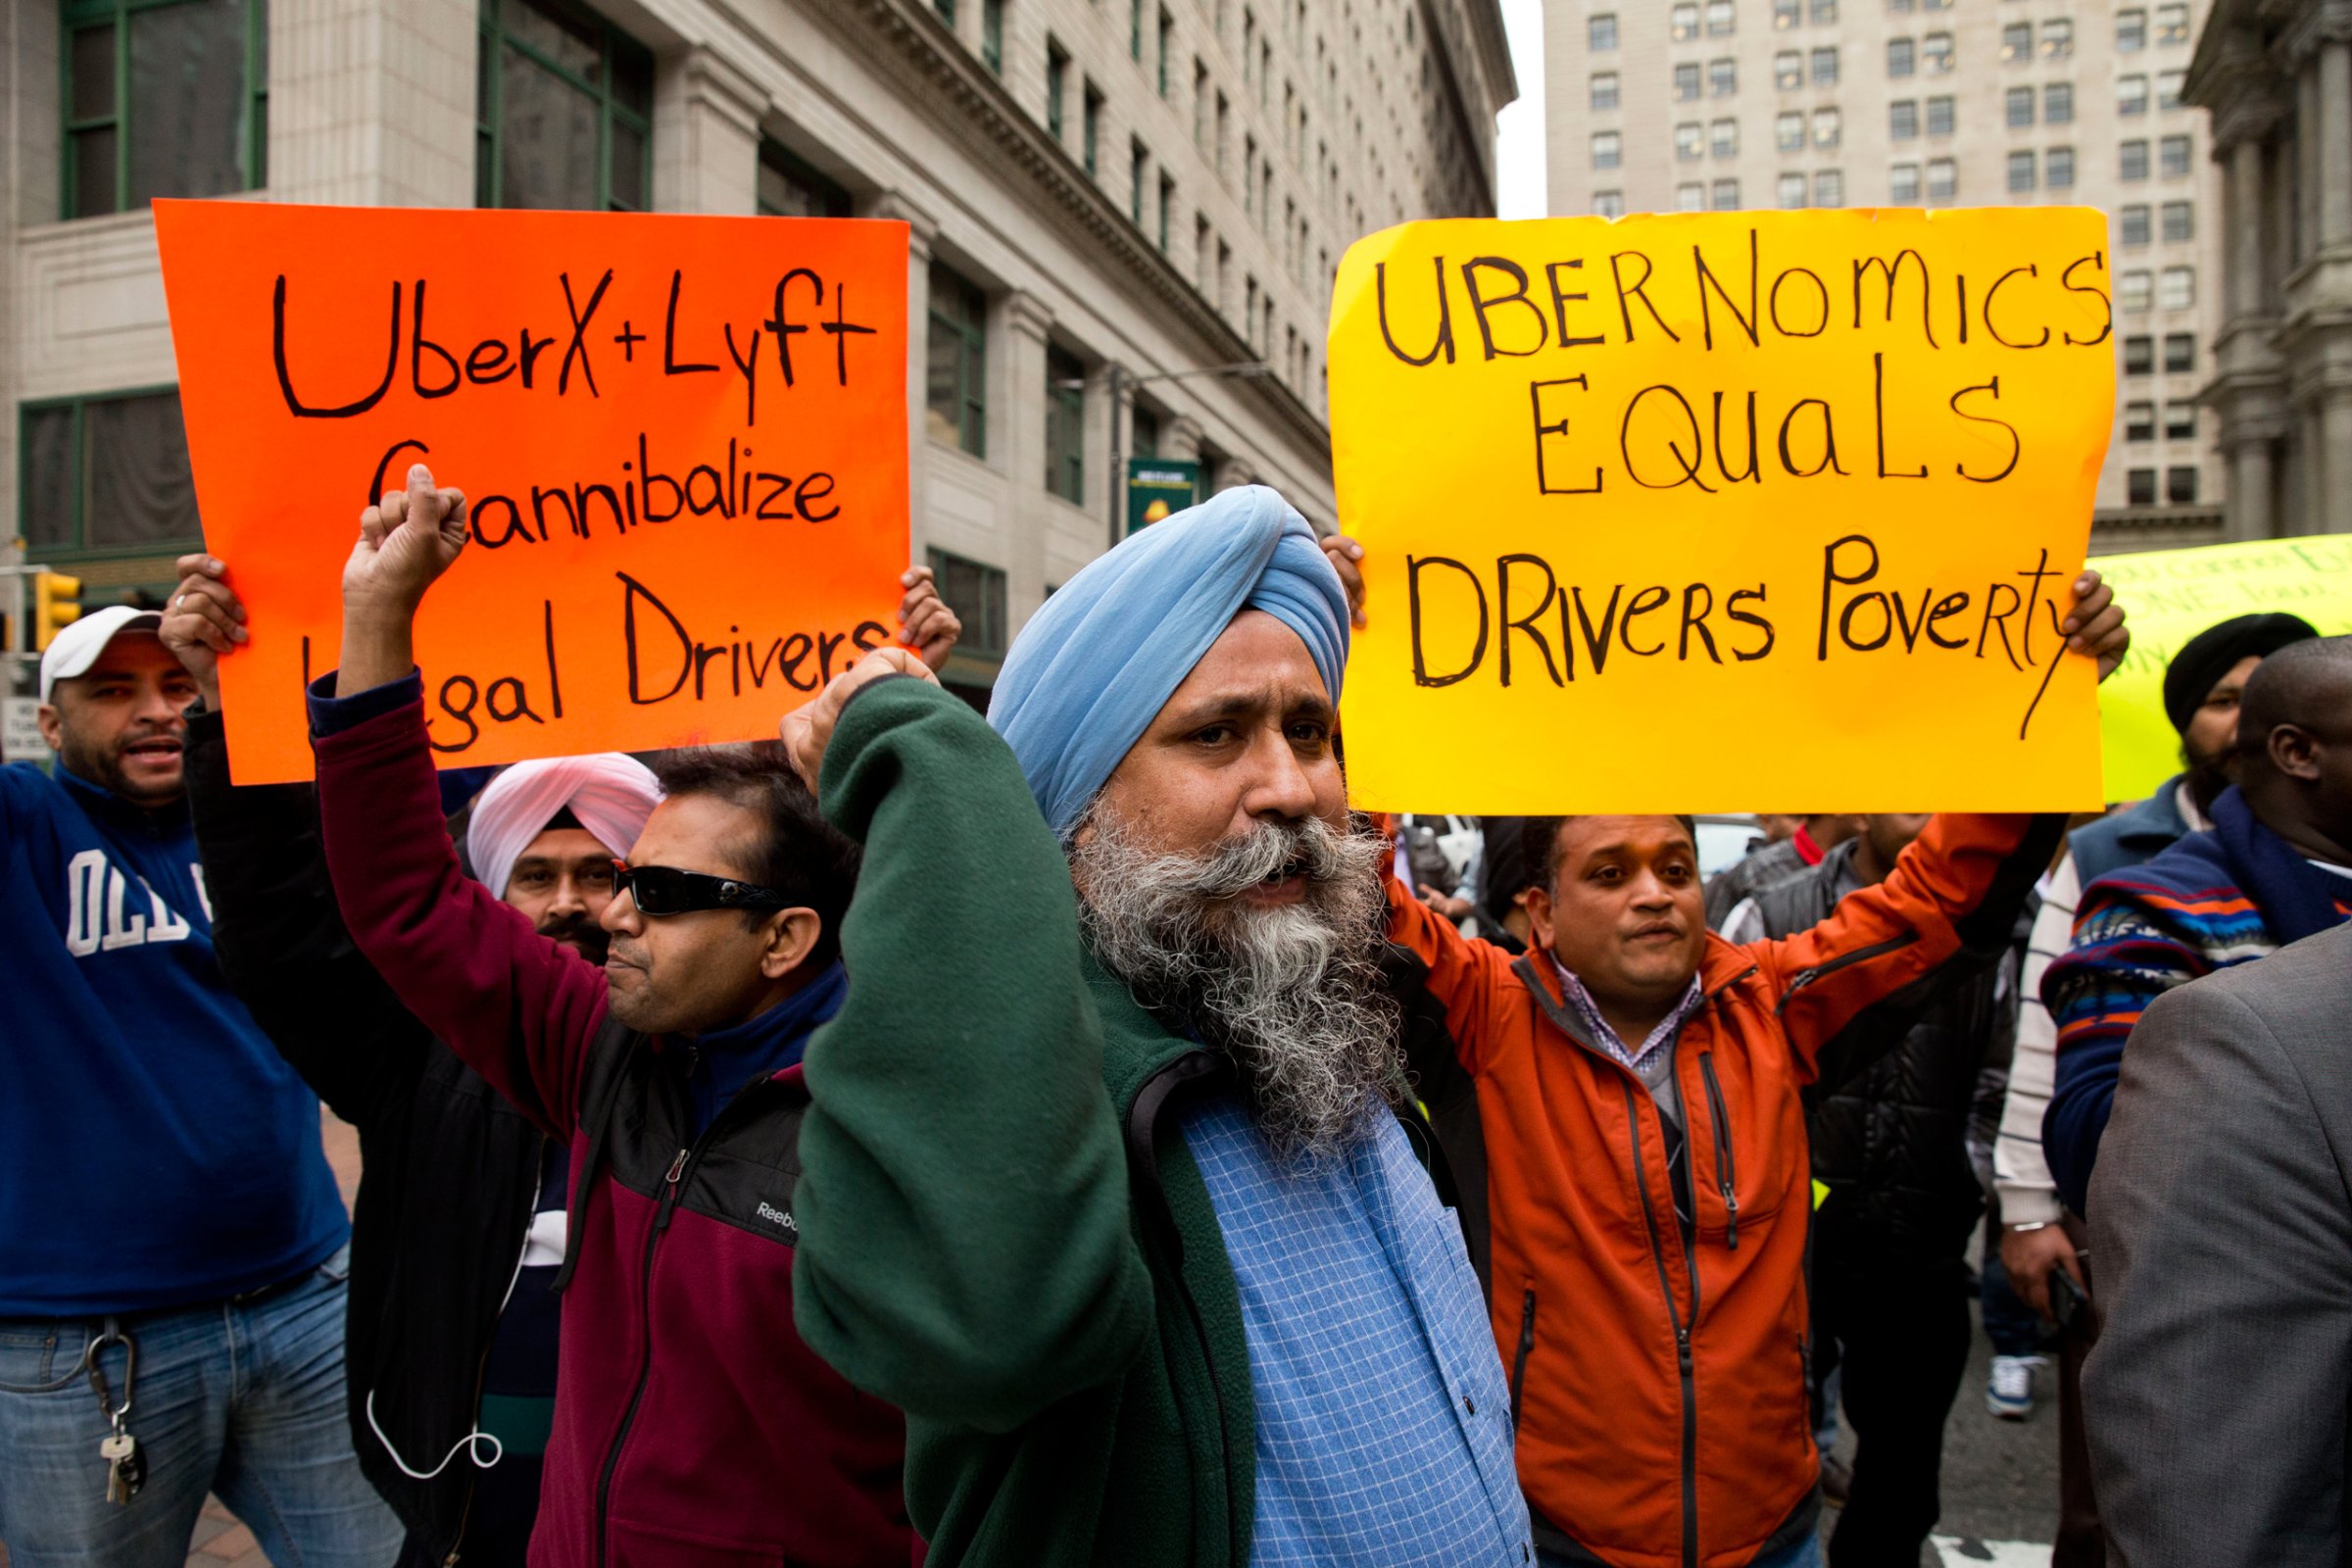 Taxi and Uber's black car service drivers protest the ride-hailing services Uber X and Lyft Wednesday, Dec. 16, 2015, in Philadelphia. The drivers are protesting that Uber and Lyft are operating without legal approval in the city. Uber says it understands drivers’ frustration but blames regulation by the Philadelphia Parking Authority and says riders are looking for an alternative. (AP Photo/Matt Rourke)